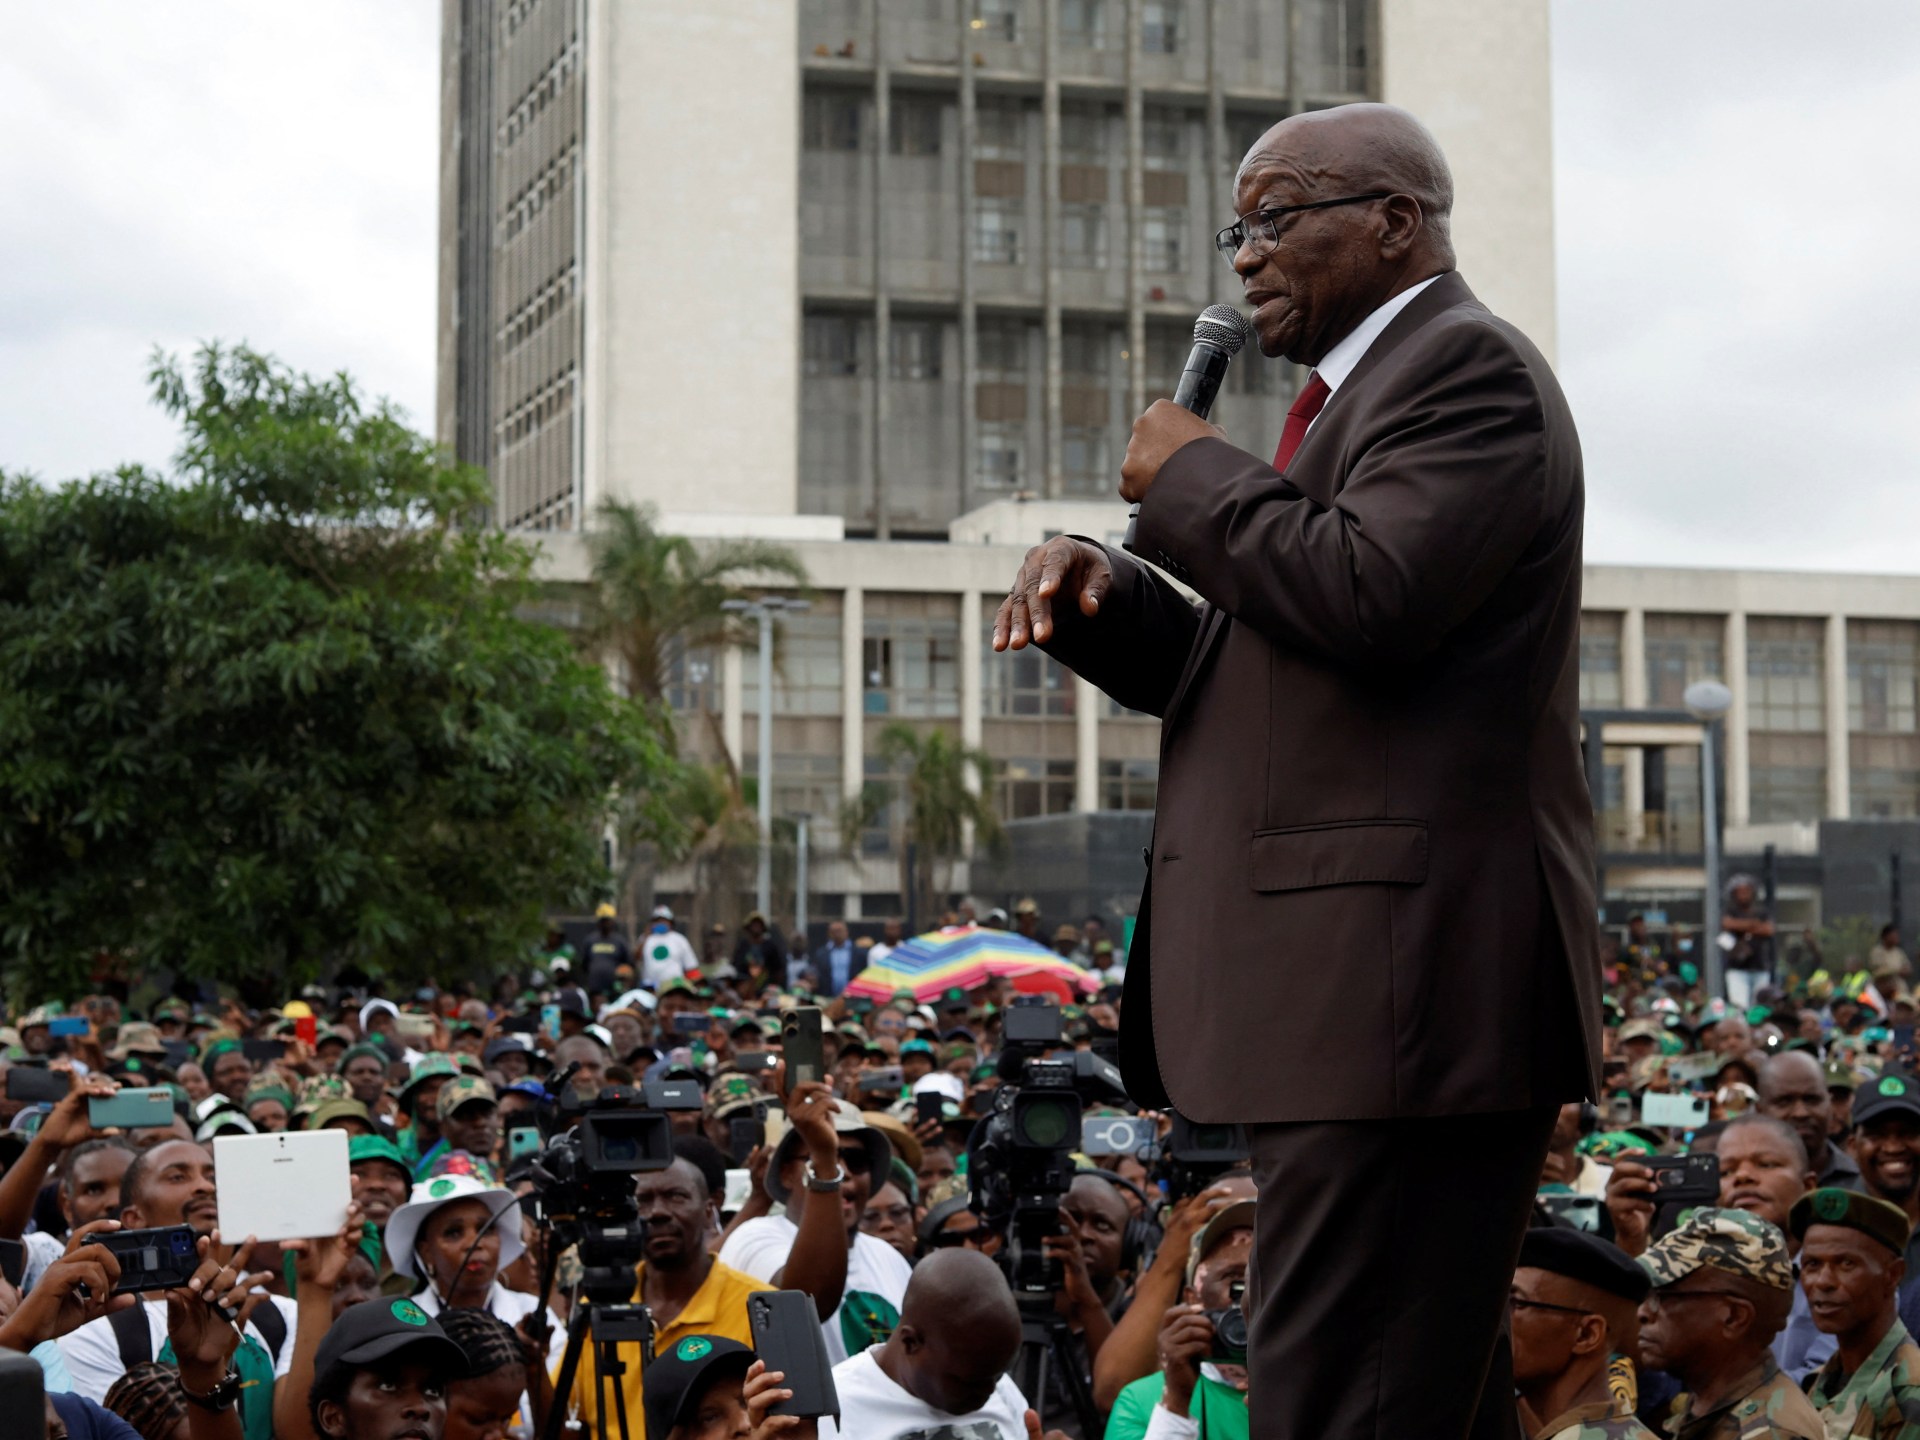 South Africa’s Jacob Zuma wins court bid to contest upcoming election | Elections News